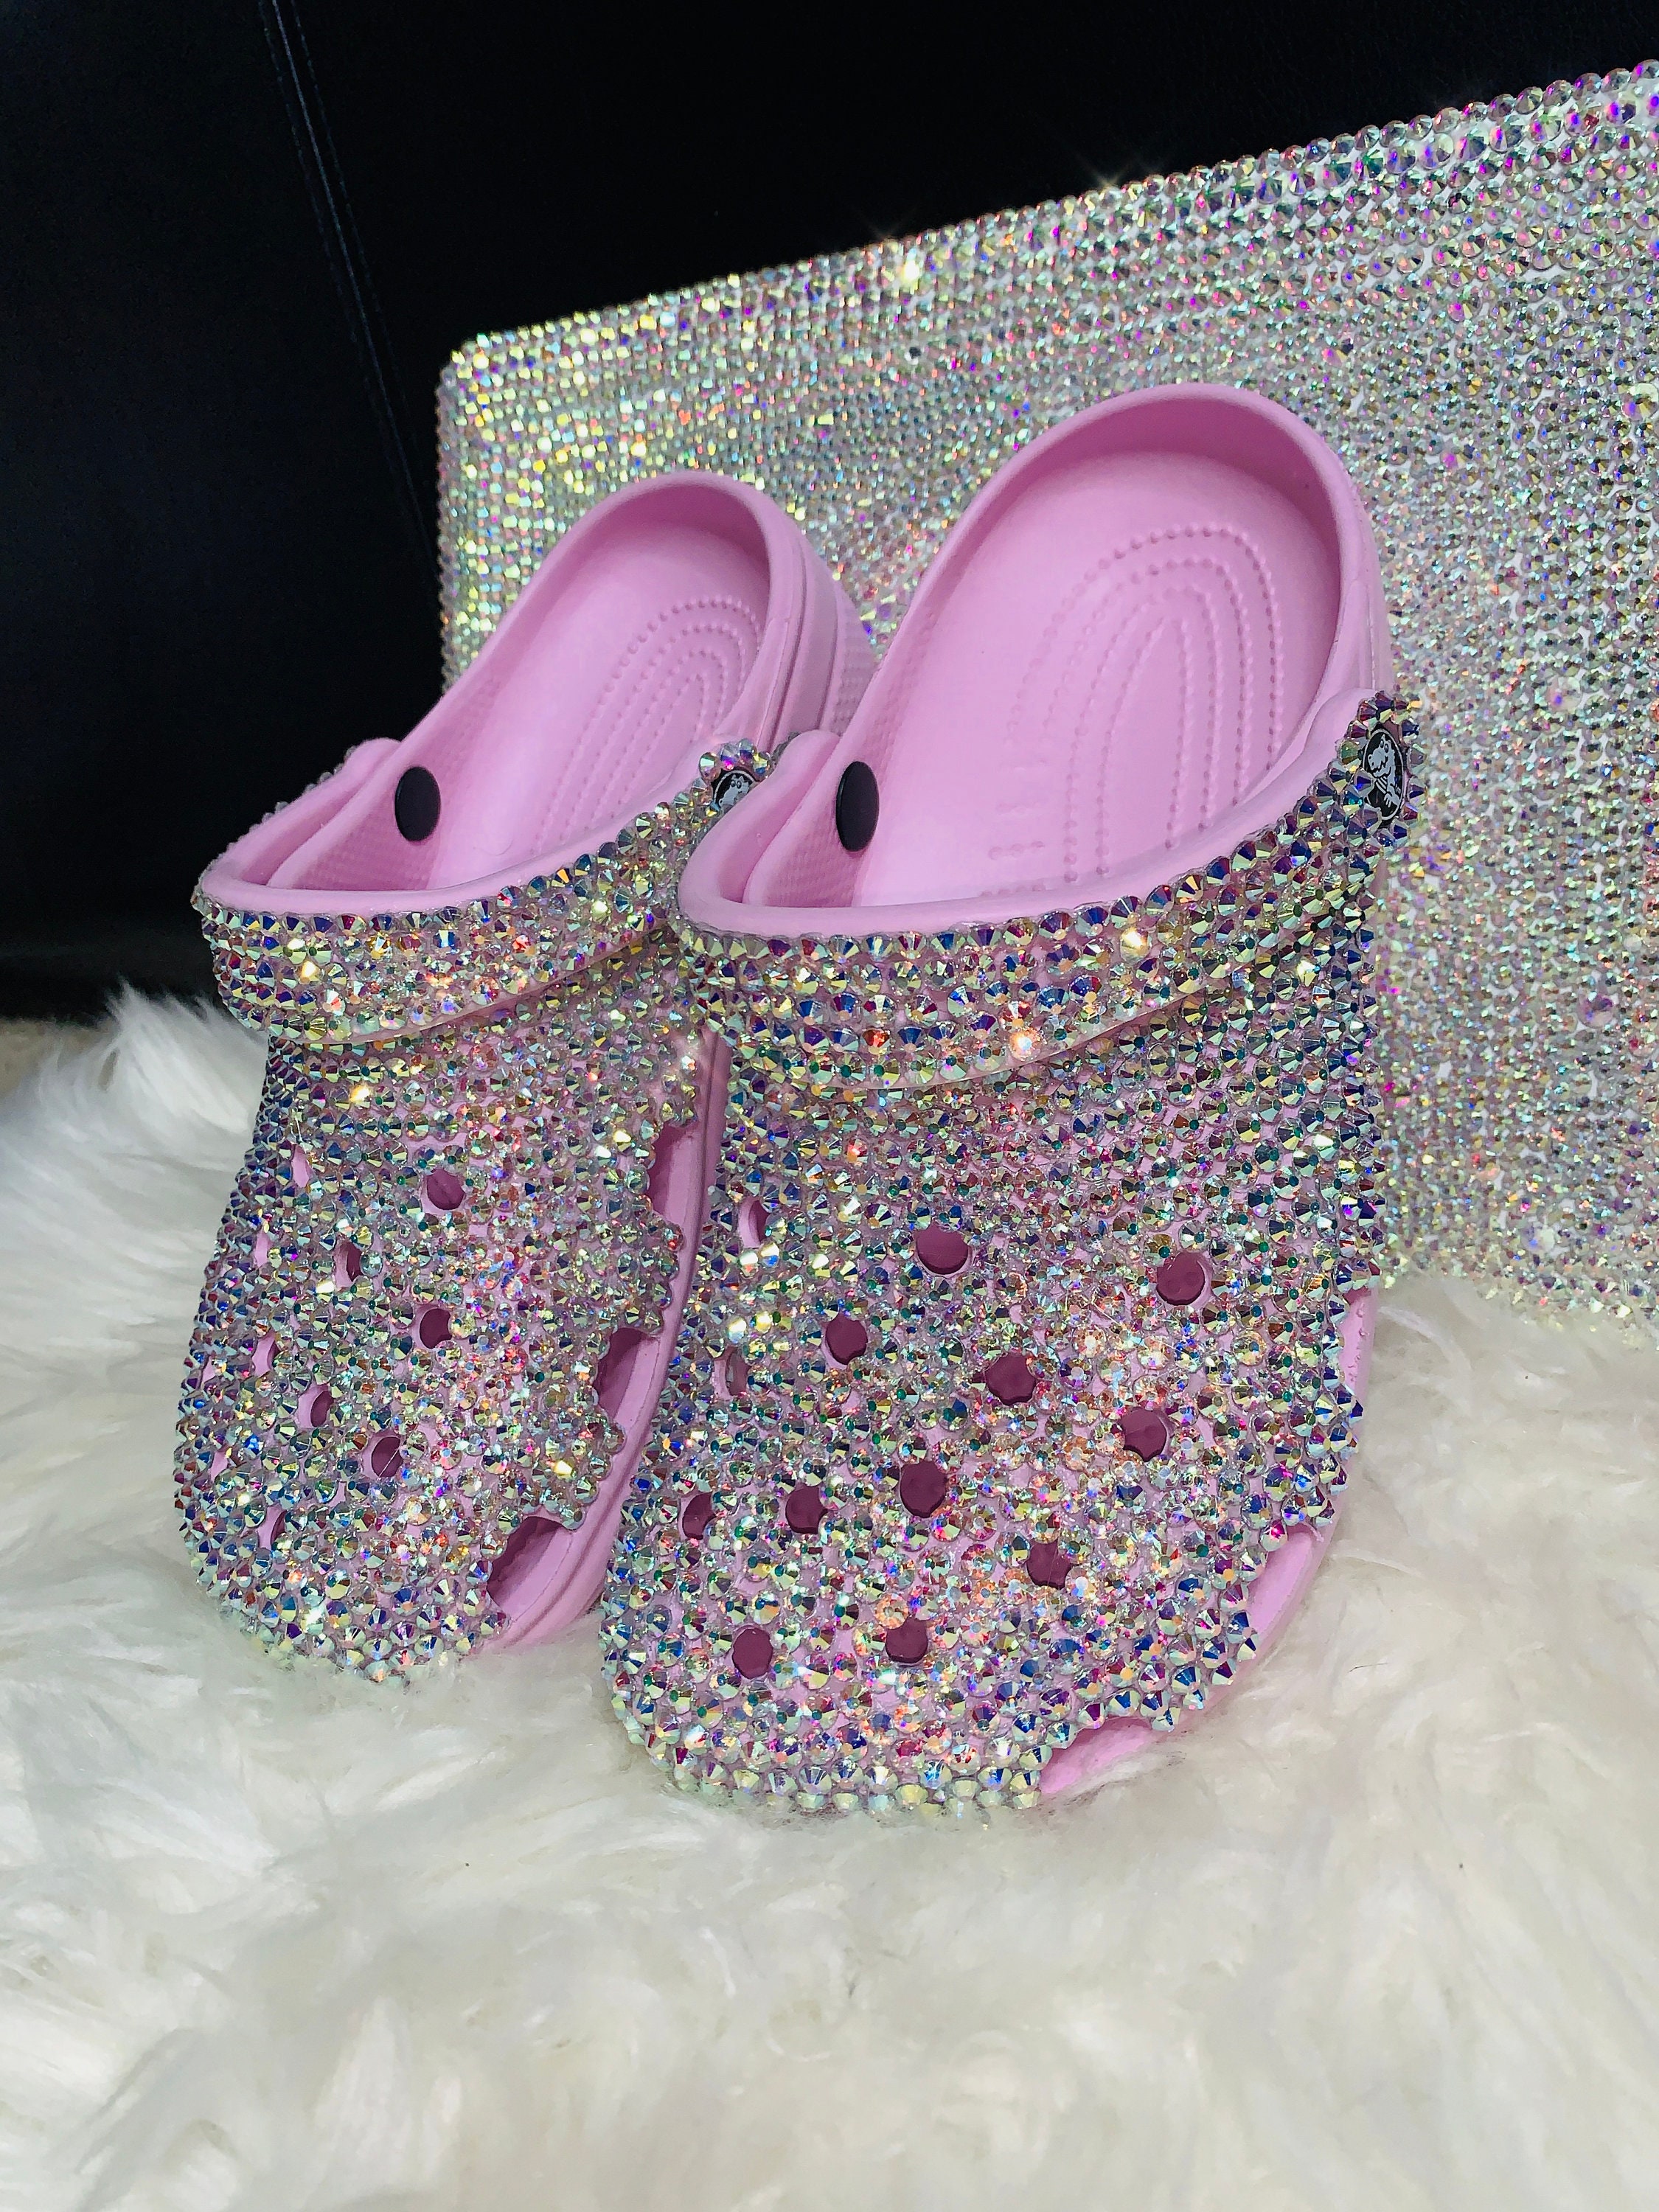 LV INSPIRED FABRIC ON GLITTER CROCS DIY VIDEO- TRYING OUT KRYSTAL